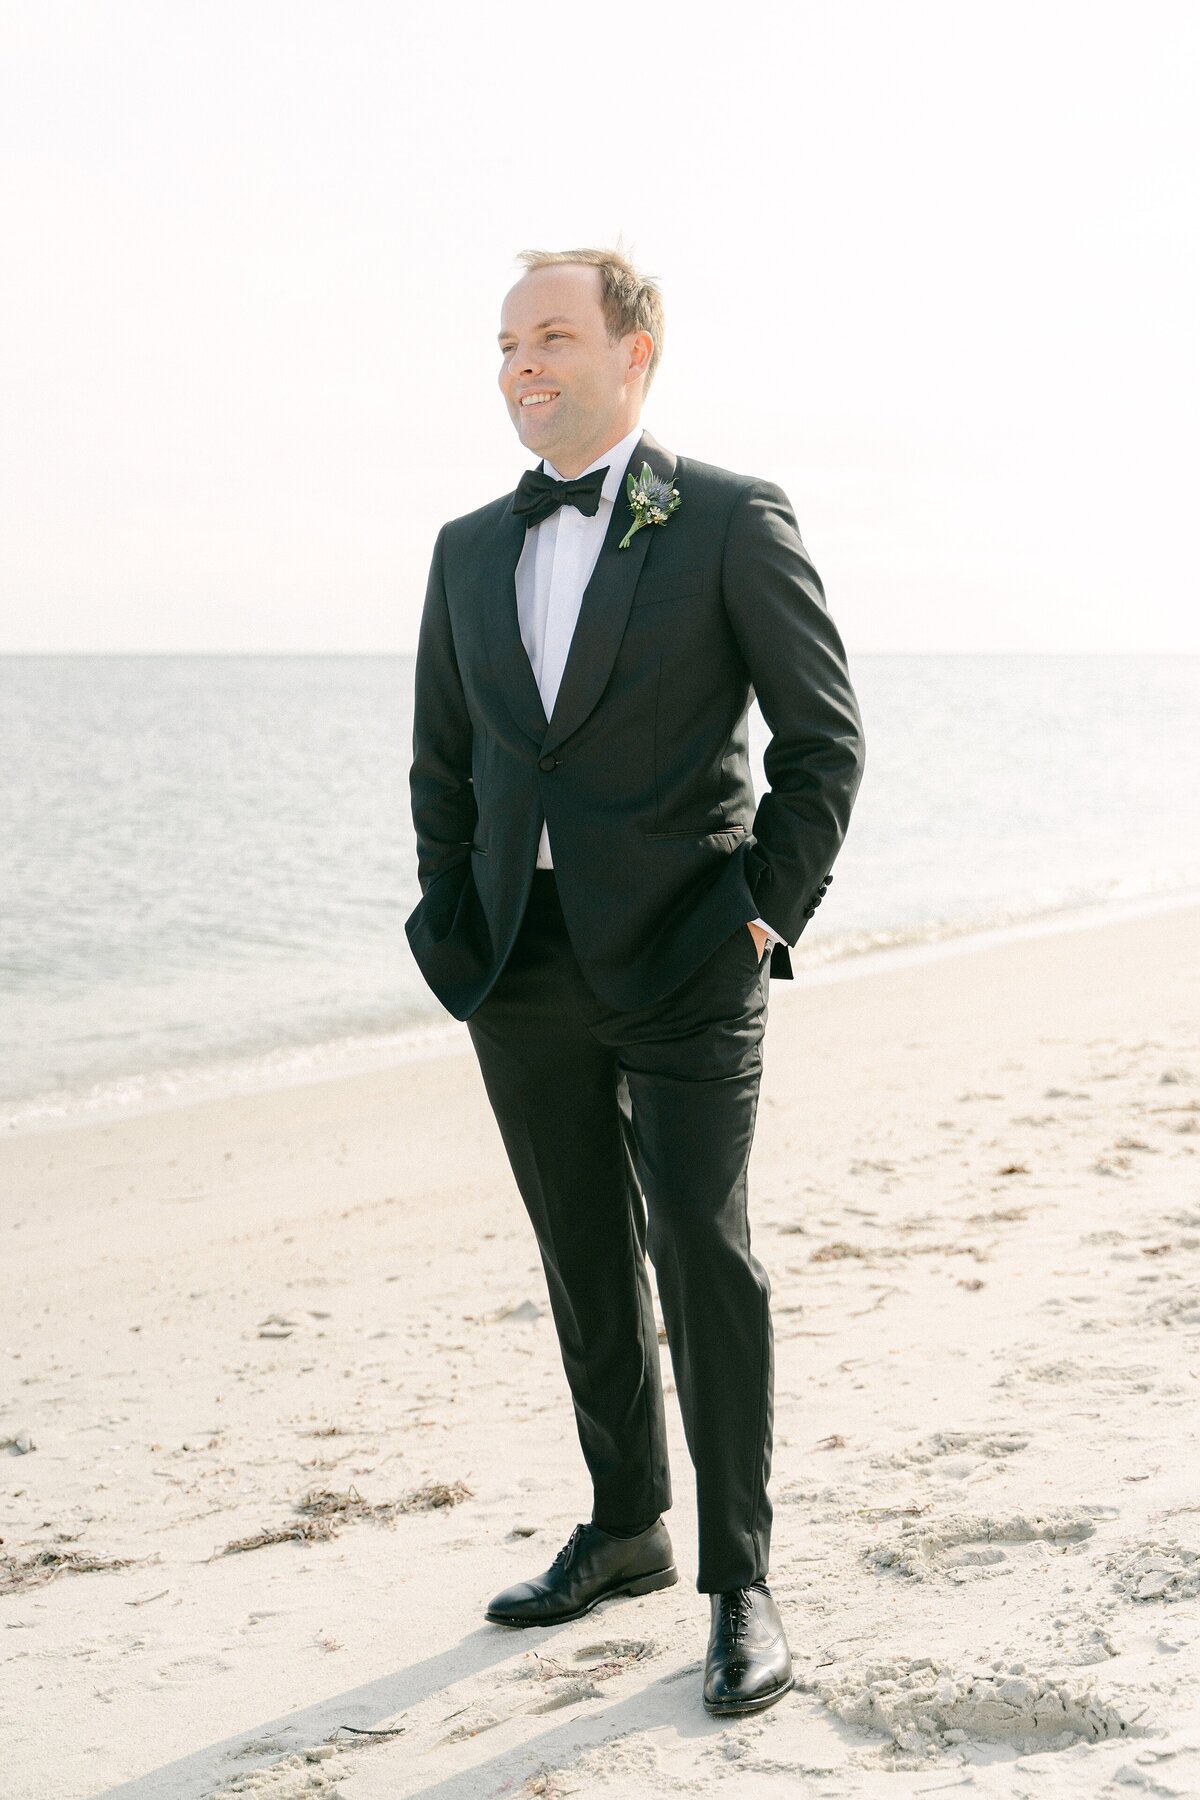 Groom on the beach in Hyannis Port for a a Cod wedding